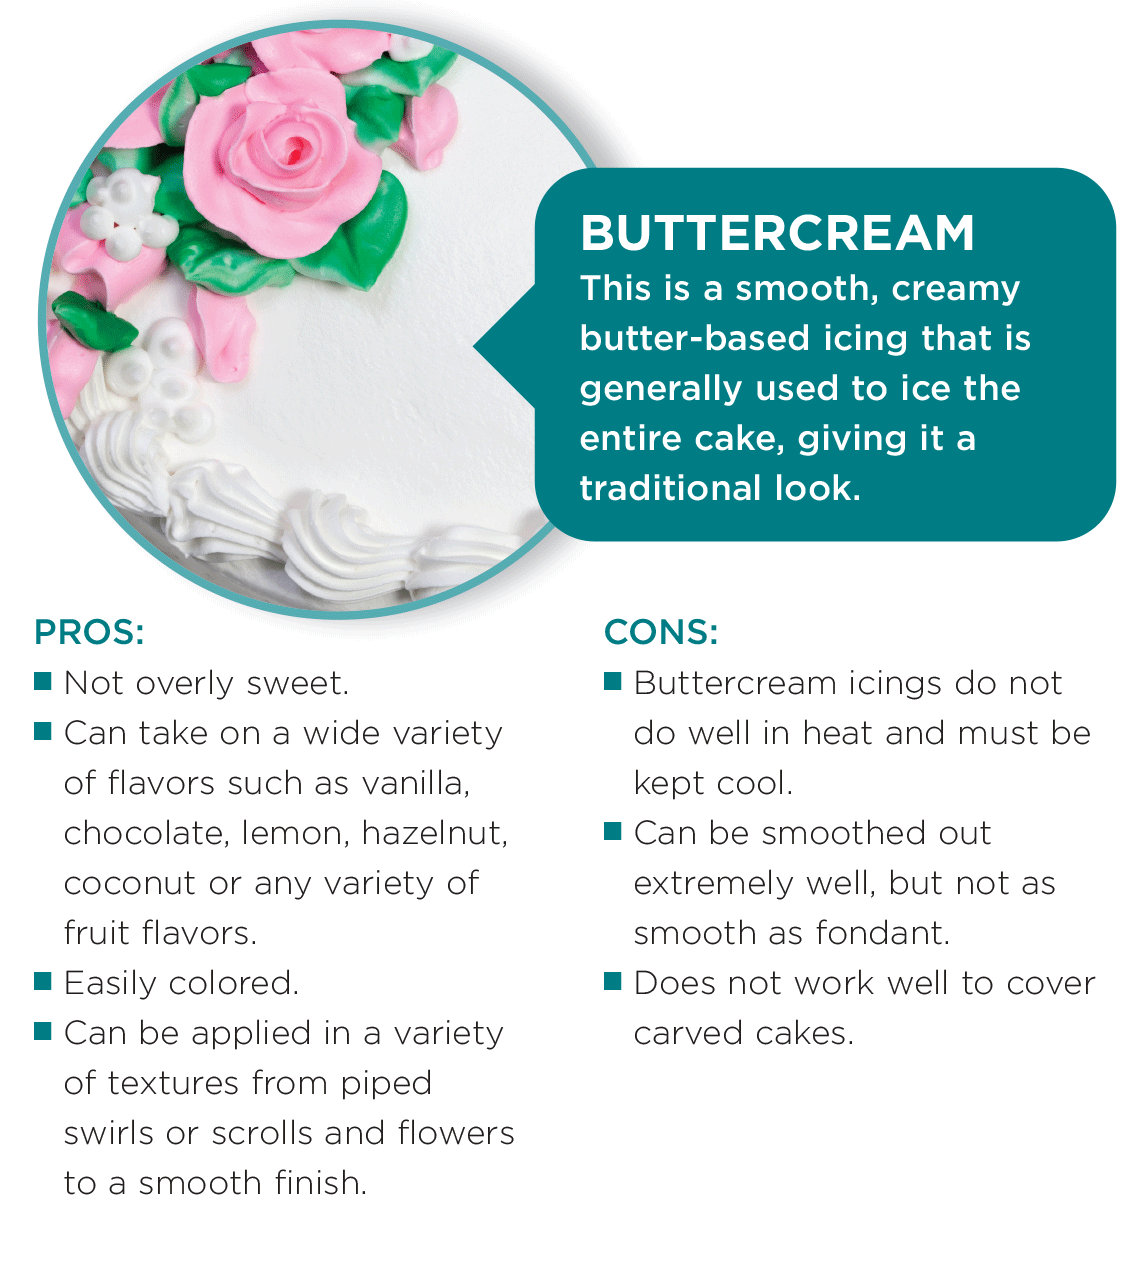 BUTTERCREAM This is a smooth, creamy butter-based icing that is generally used to ice the entire cake, giving it a traditional look.